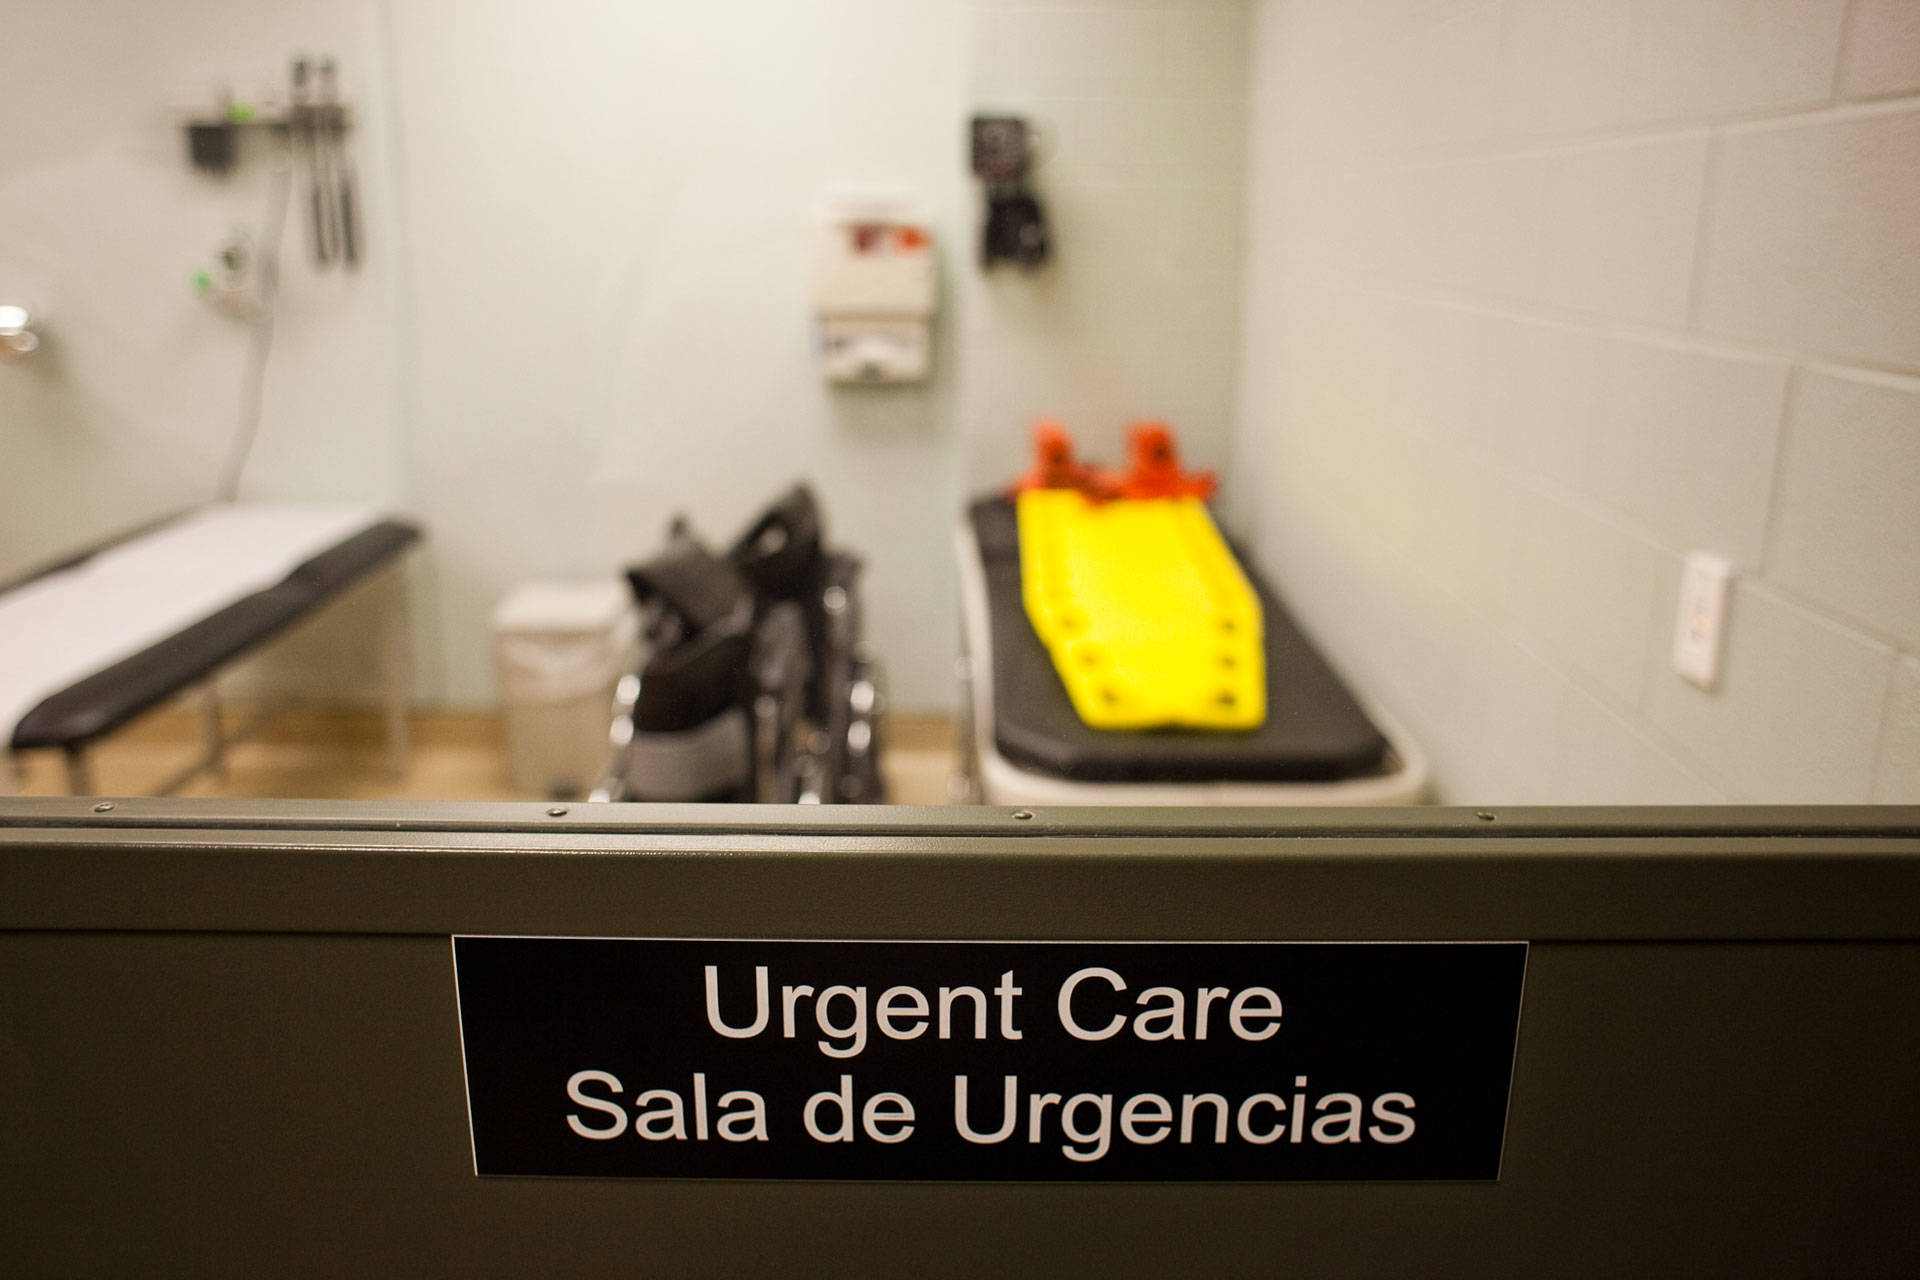 A medical facility inside the Karnes County Residential Center, pictured on July 31, 2014 in Karnes City, Texas. ICE uses the center to hold detained immigrant families. Drew Anthony Smith/Getty Images